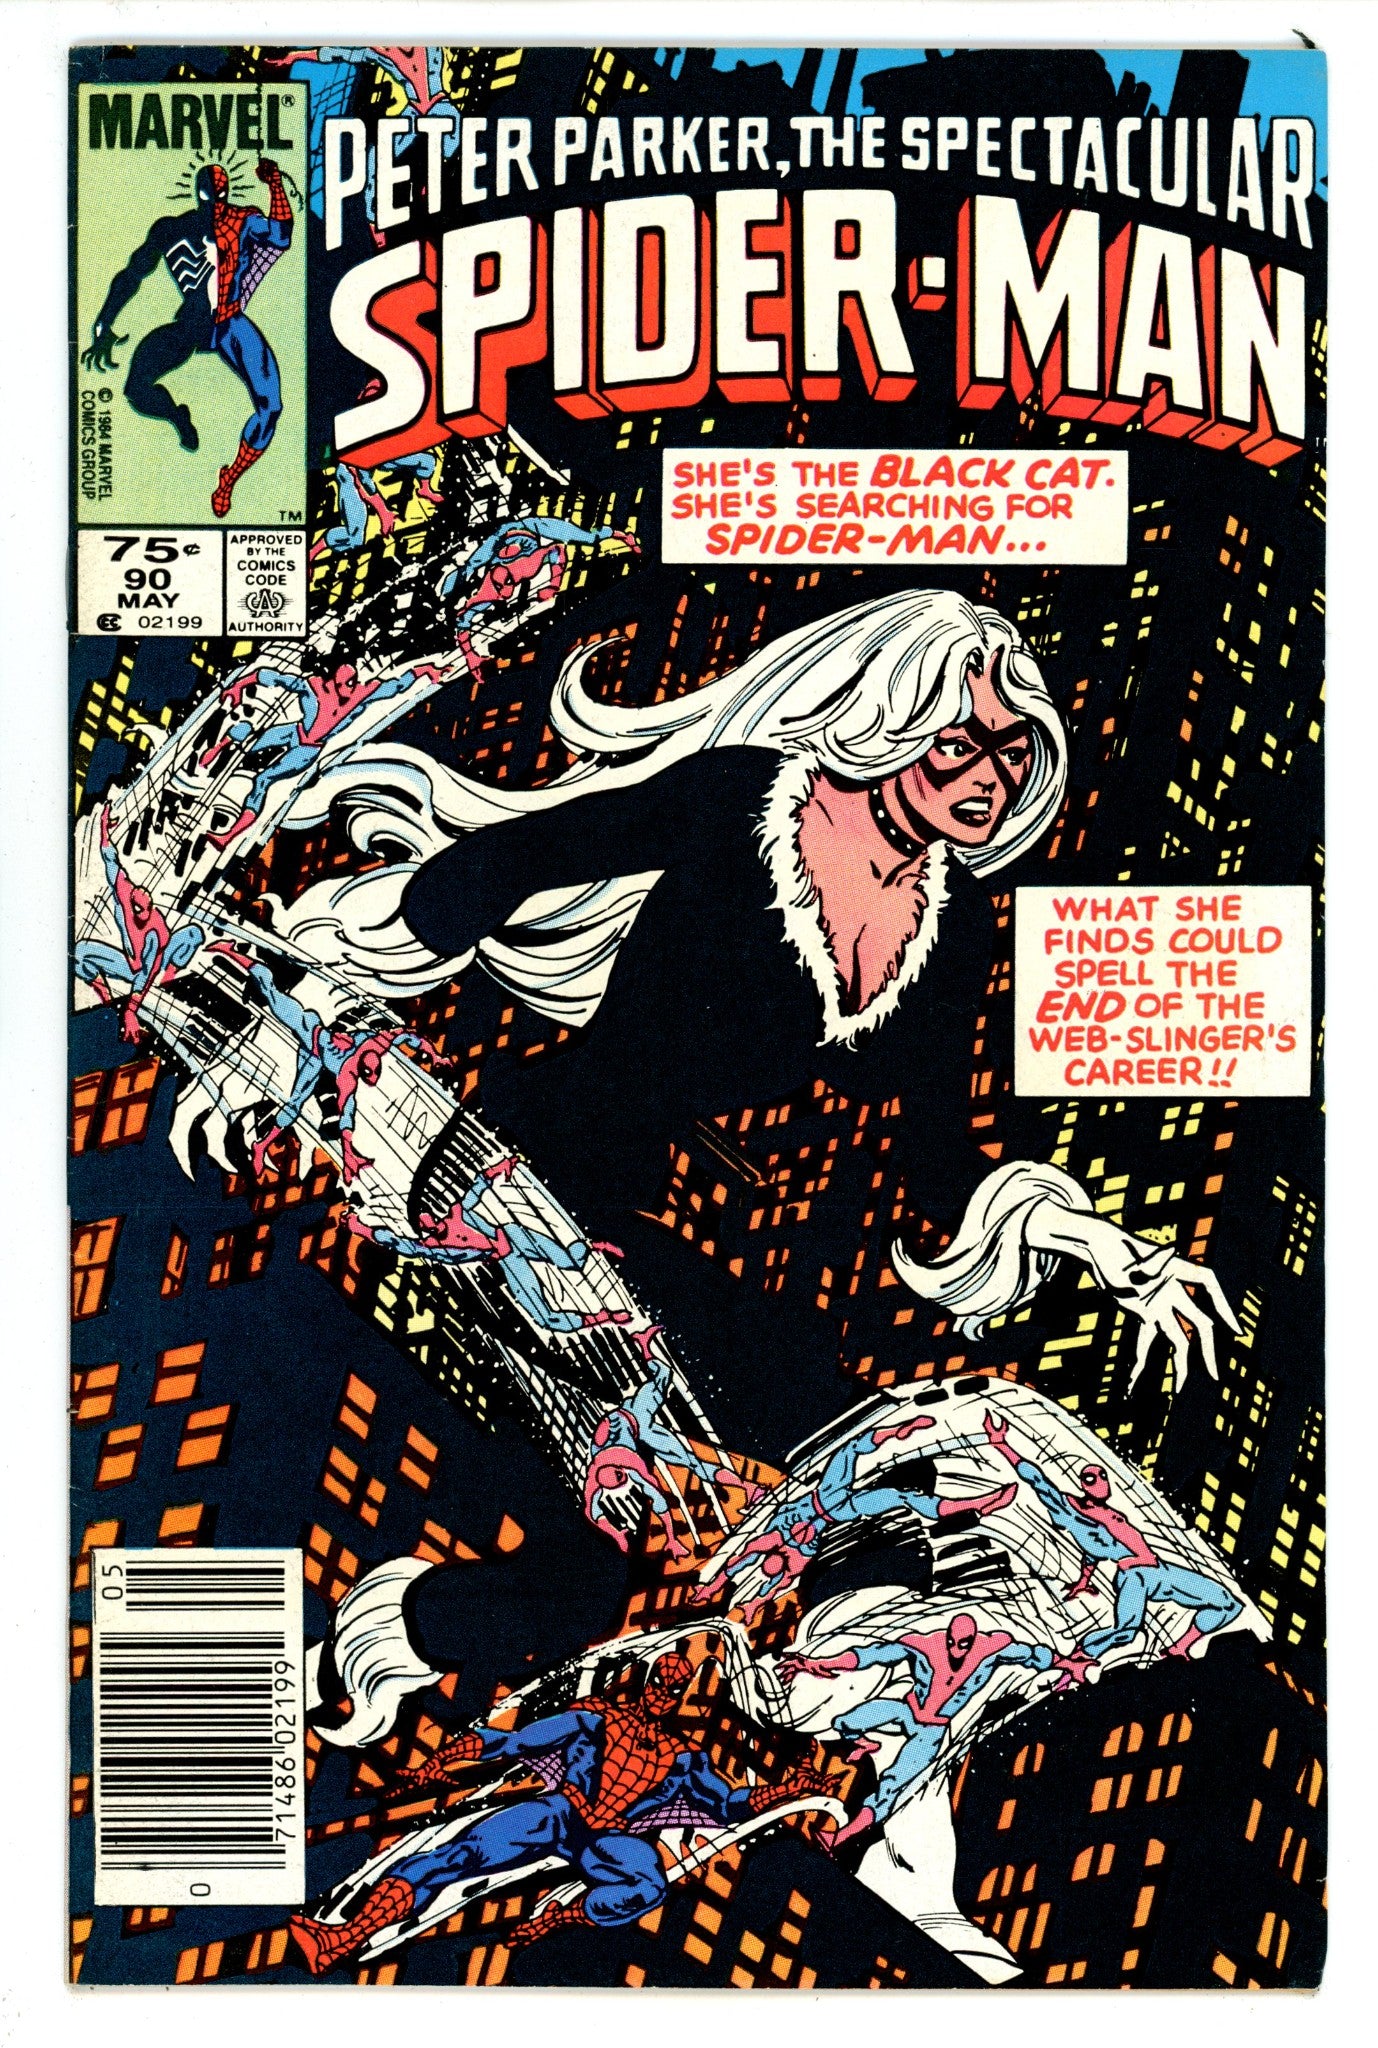 The Spectacular Spider-Man Vol 1 90 FN/VF (7.0) (1984) Canadian Price Variant 